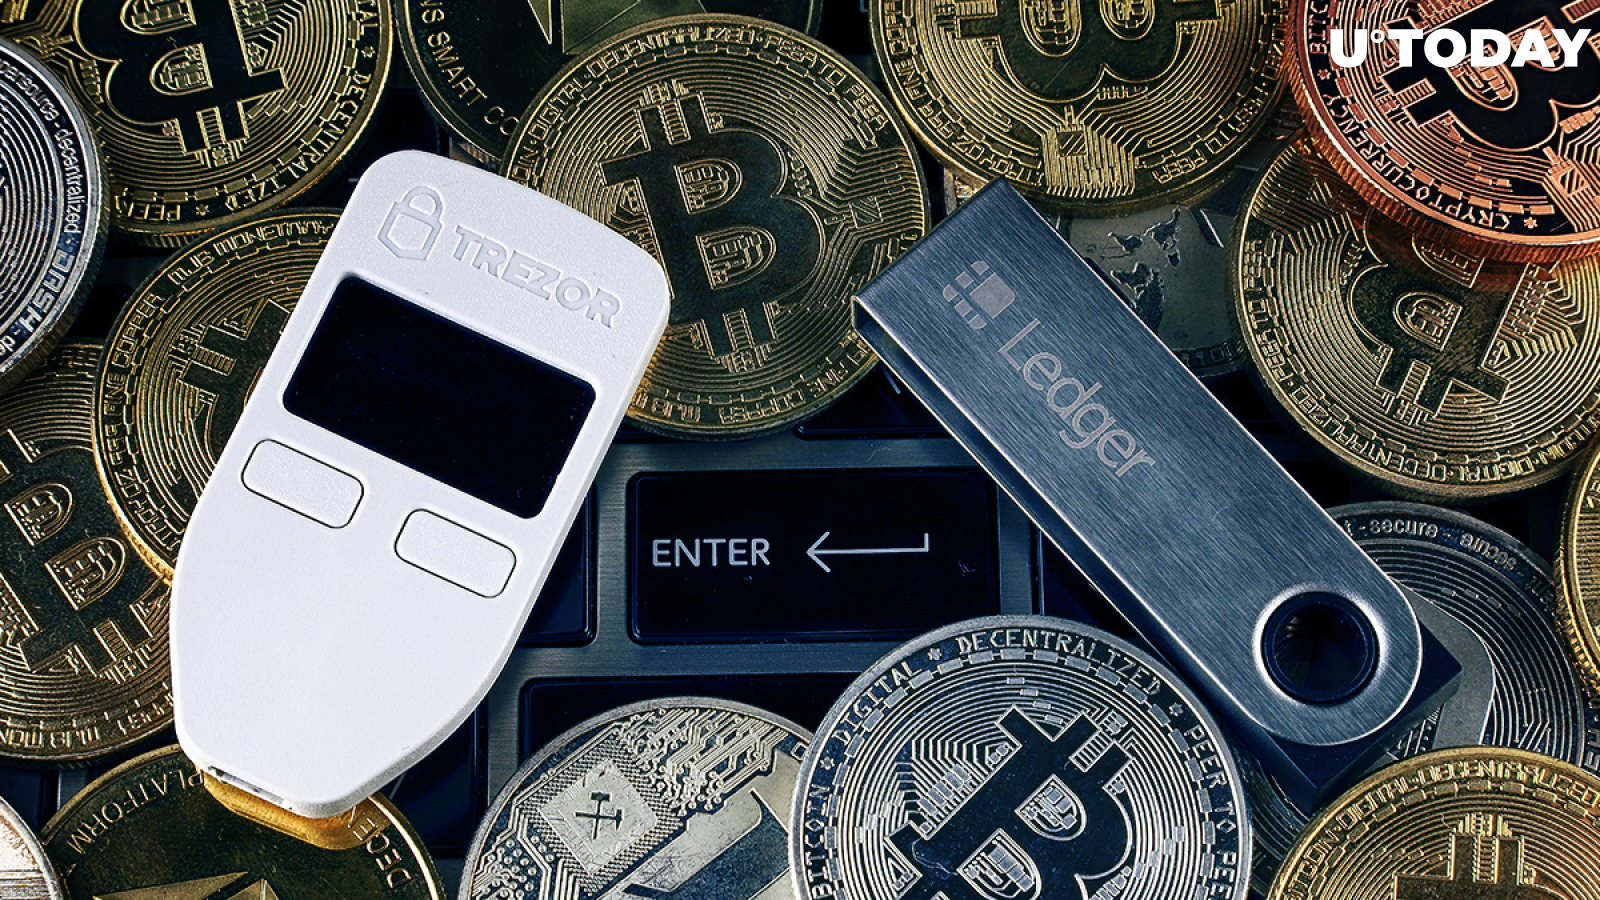 Under the Breach Cybercrime Experts Say Trezor and Ledger Crypto Wallet User Databases for Sale